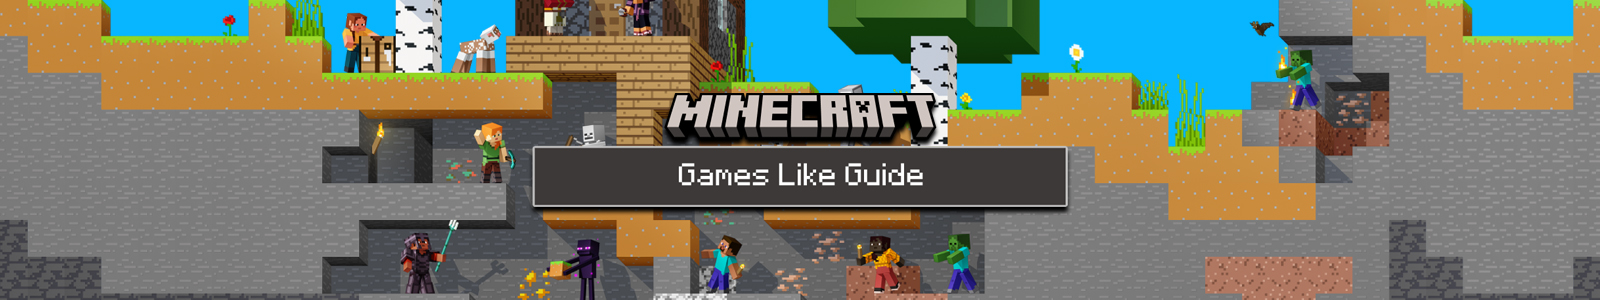 Minecraft Dungeons games like guide